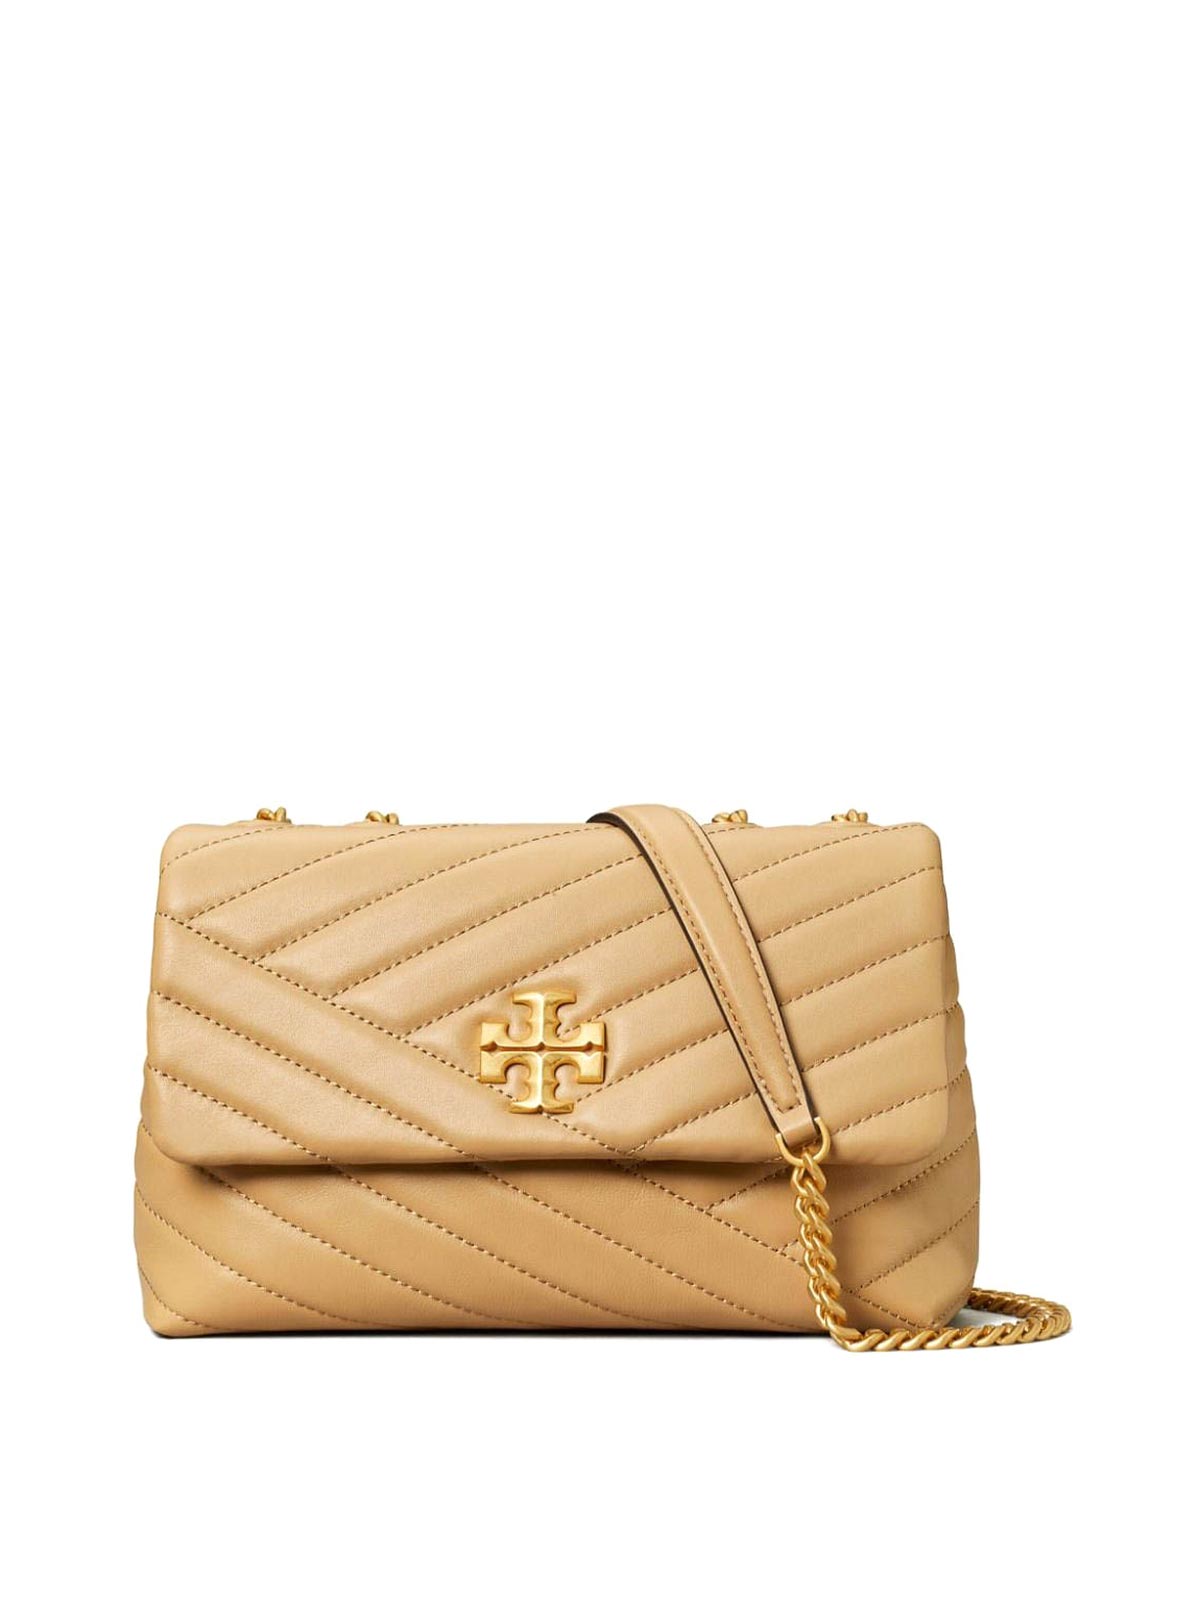 Tory Burch Kira Small Leather Shoulder Bag In Beis